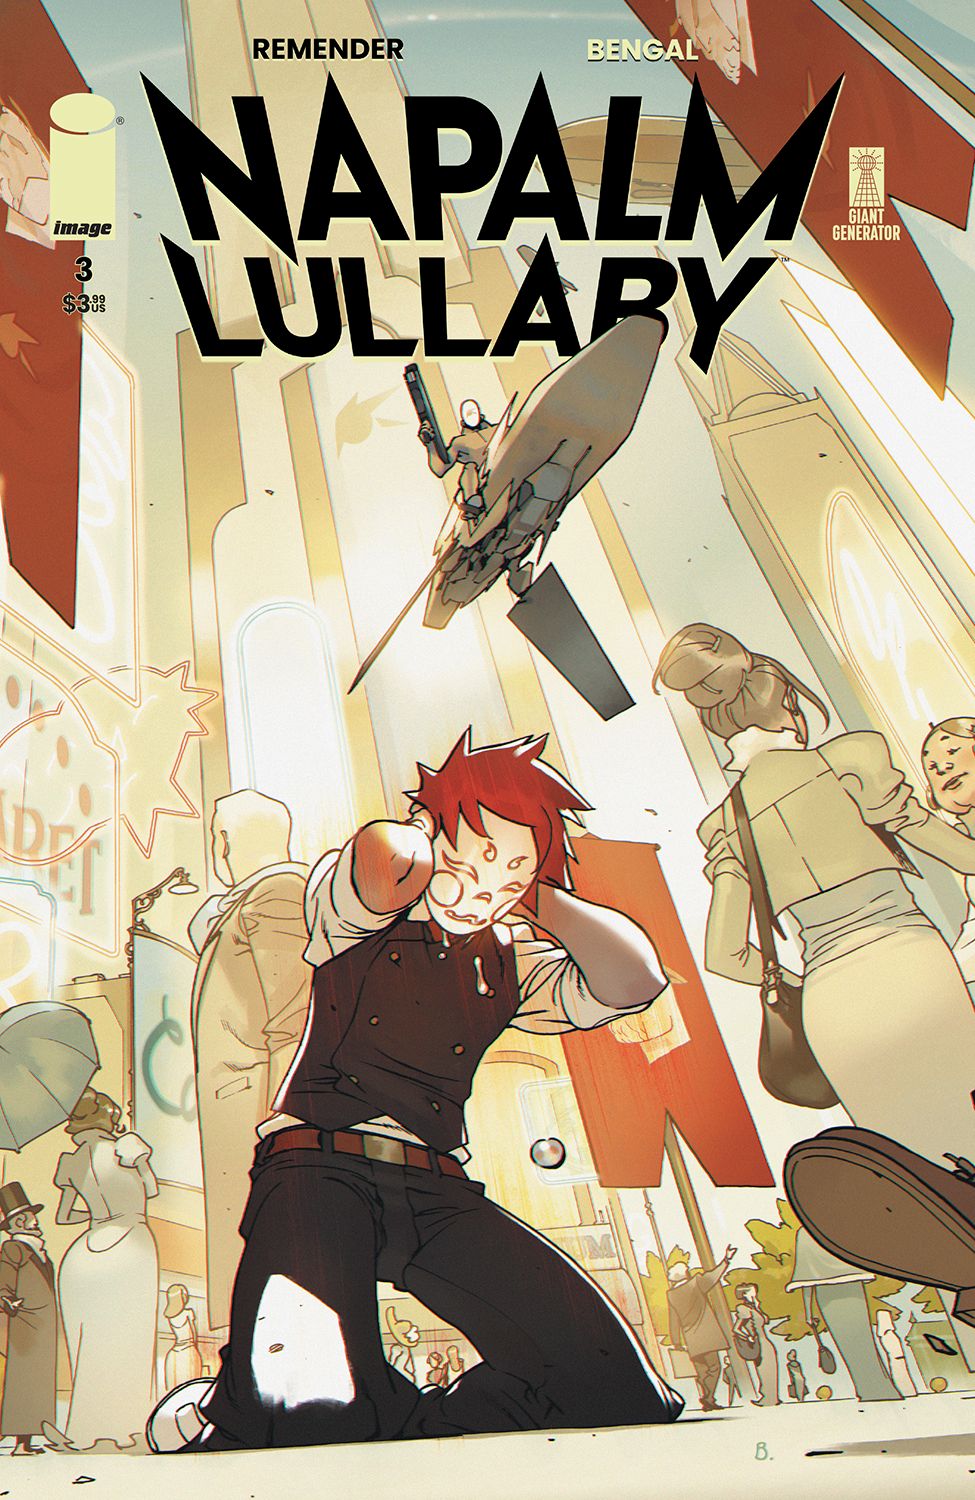 Napalm Lullaby #3 Comic